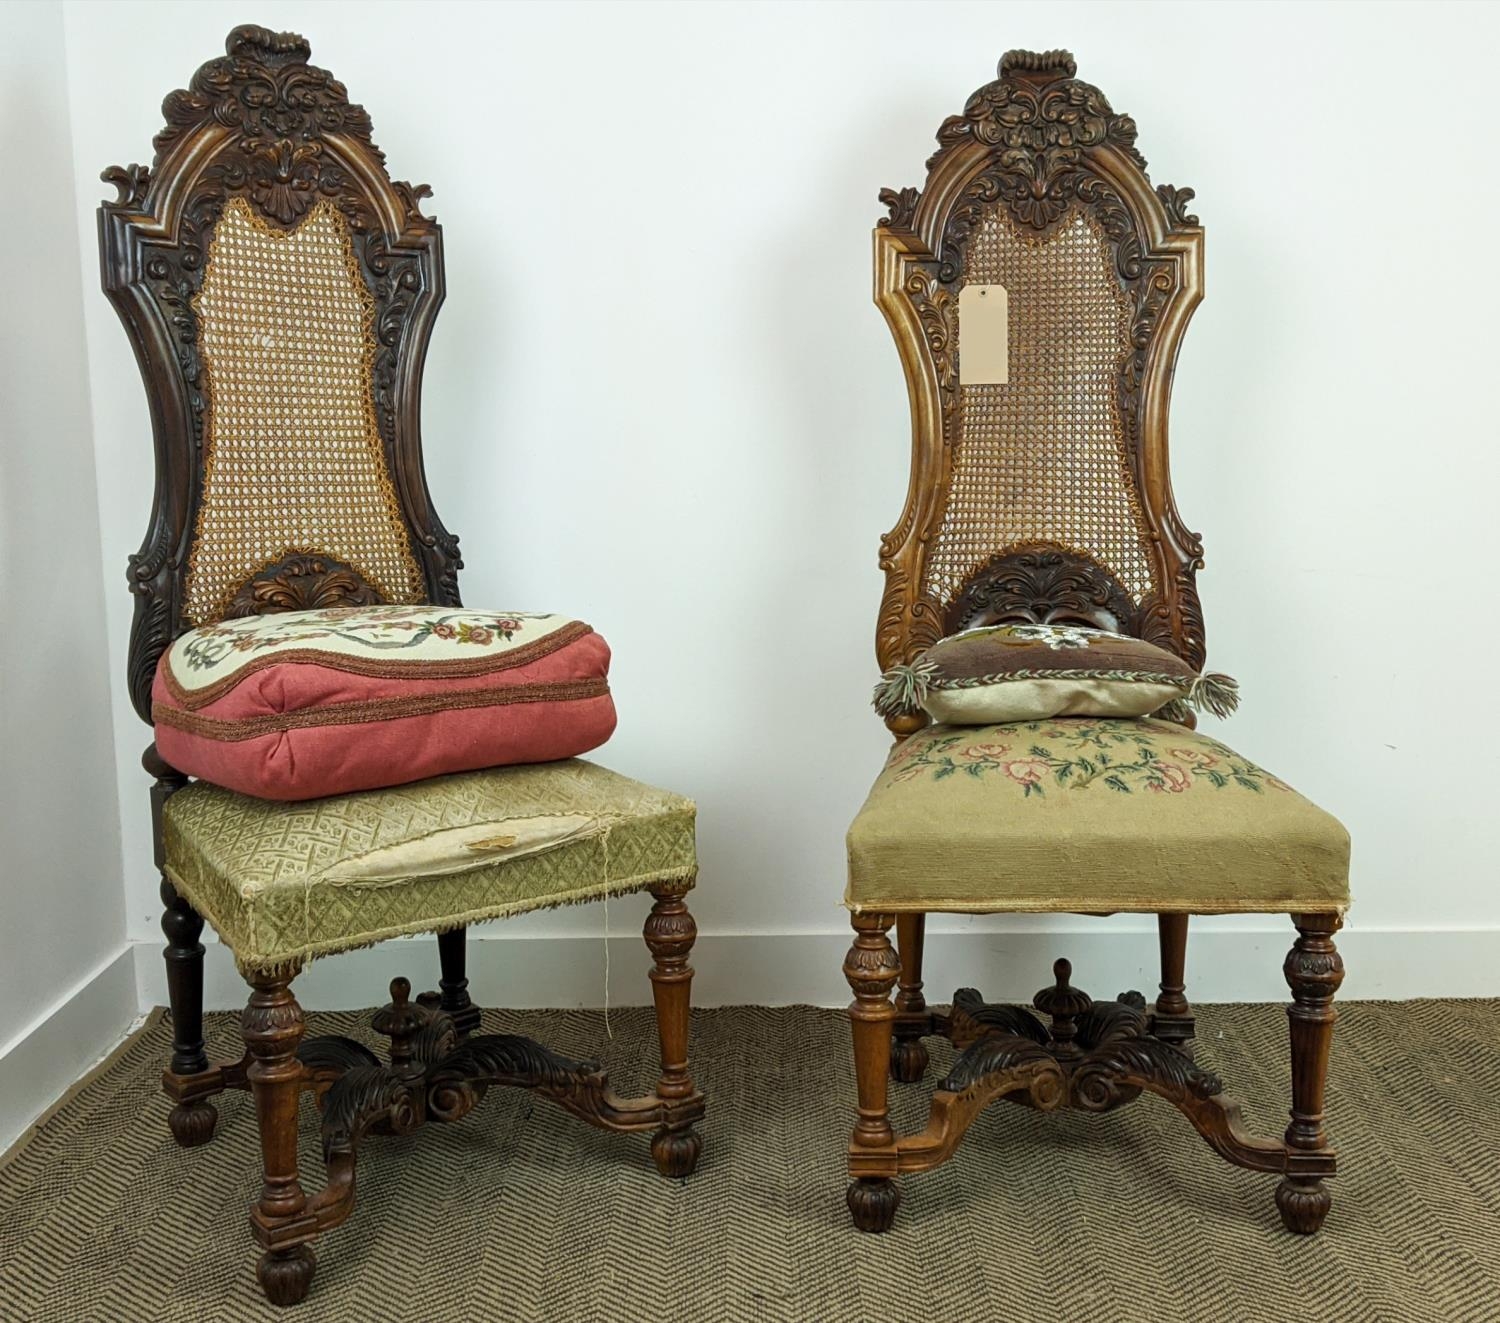 SIDE CHAIRS, a pair, 19th century Dutch with carved showframes with caned back panels and